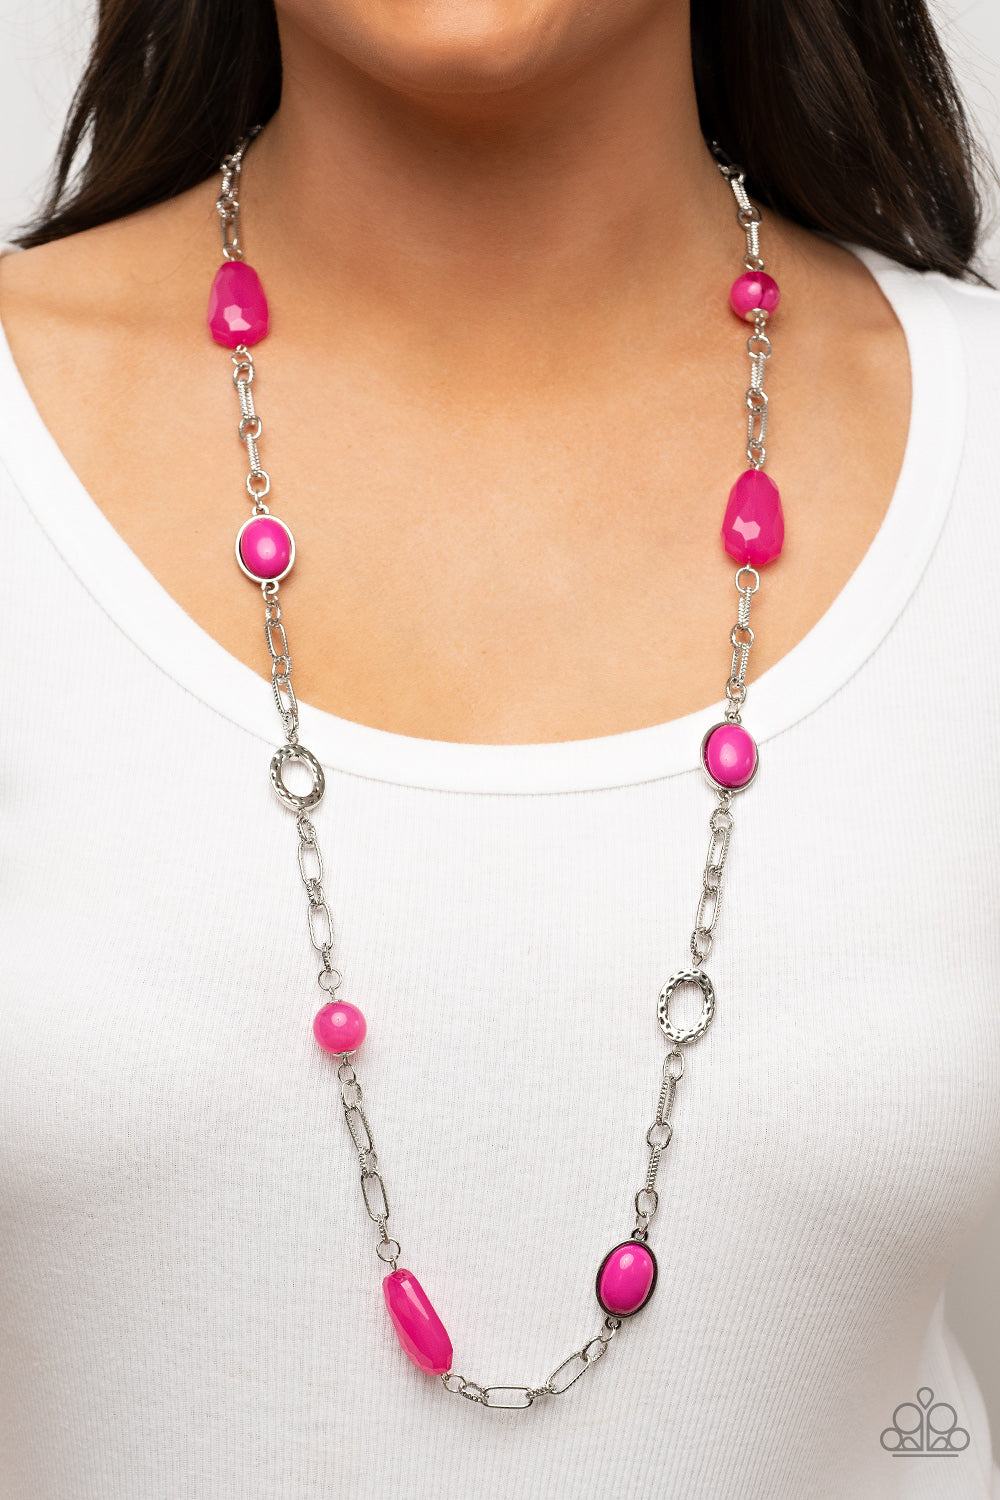 Oversized chain necklace with acrylic gemstones